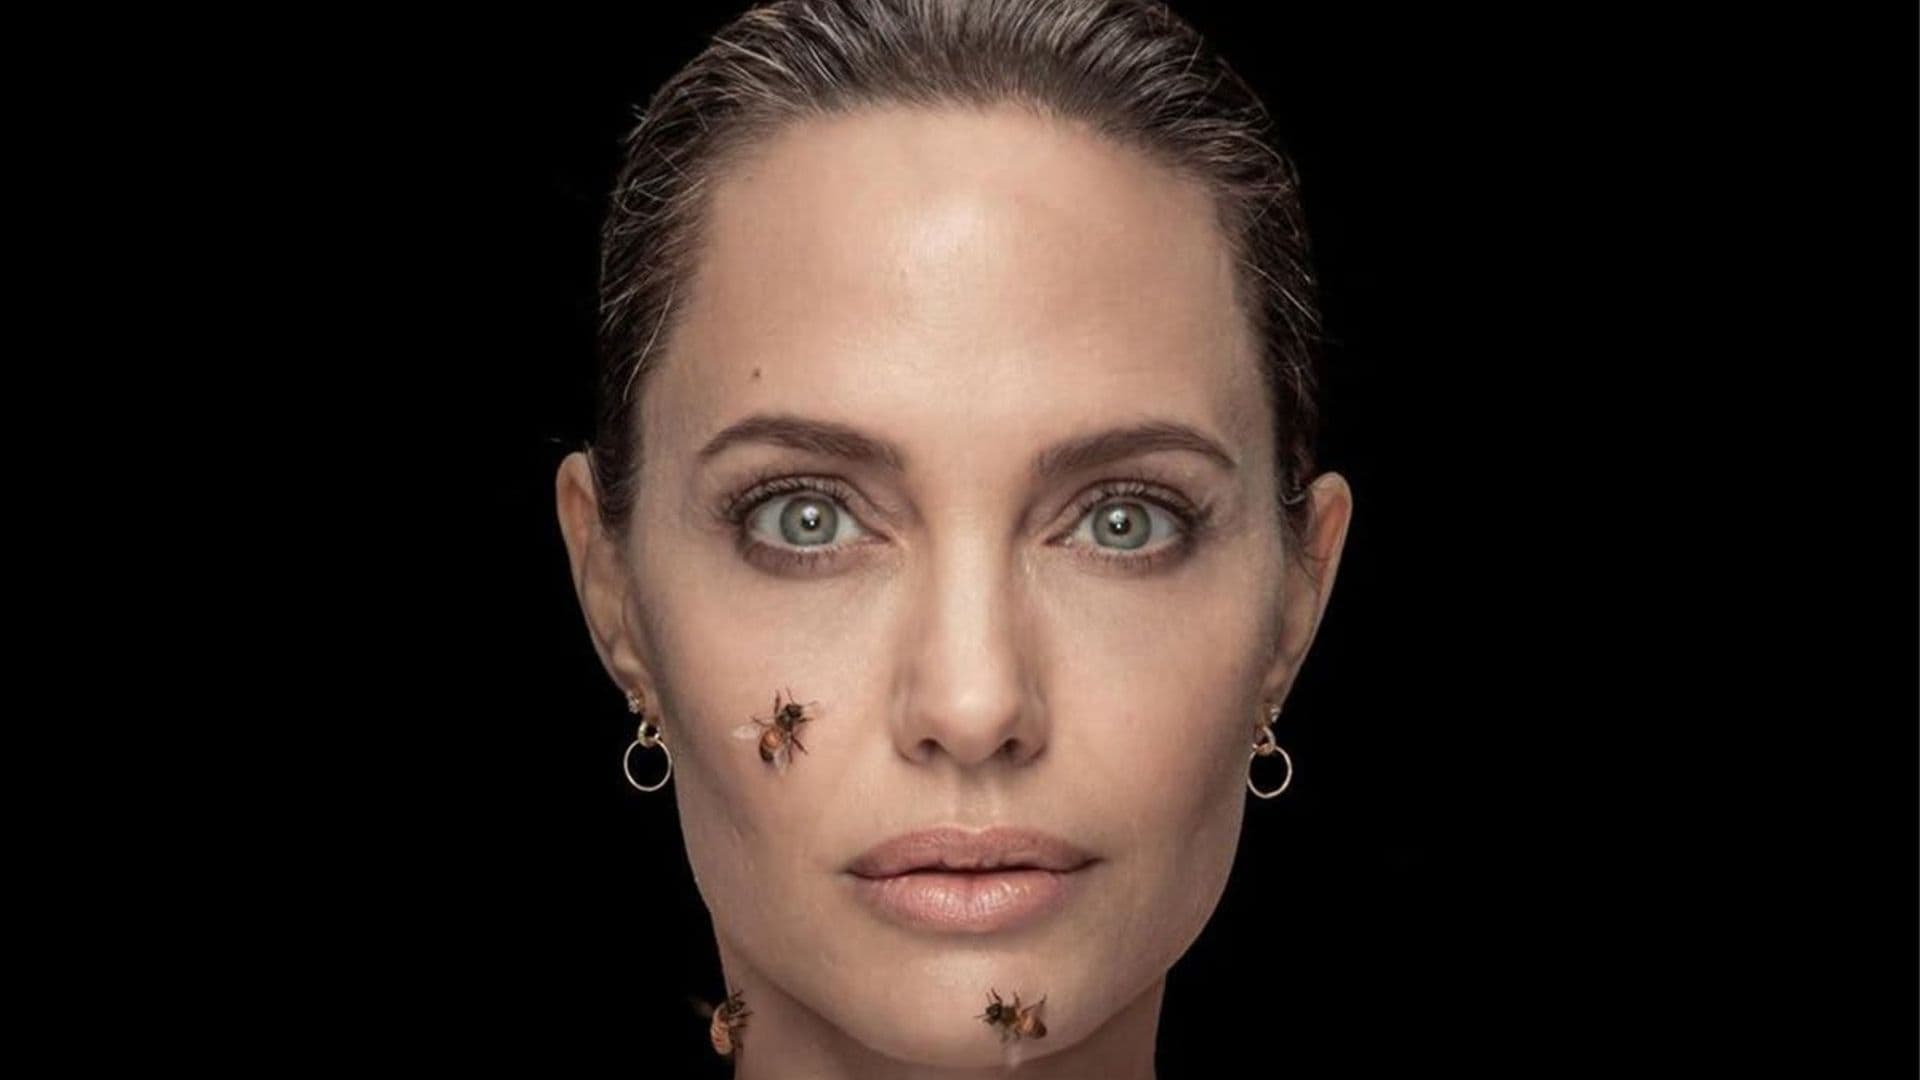 Angelina Jolie poses while covered in bees to raise awareness for conversation efforts